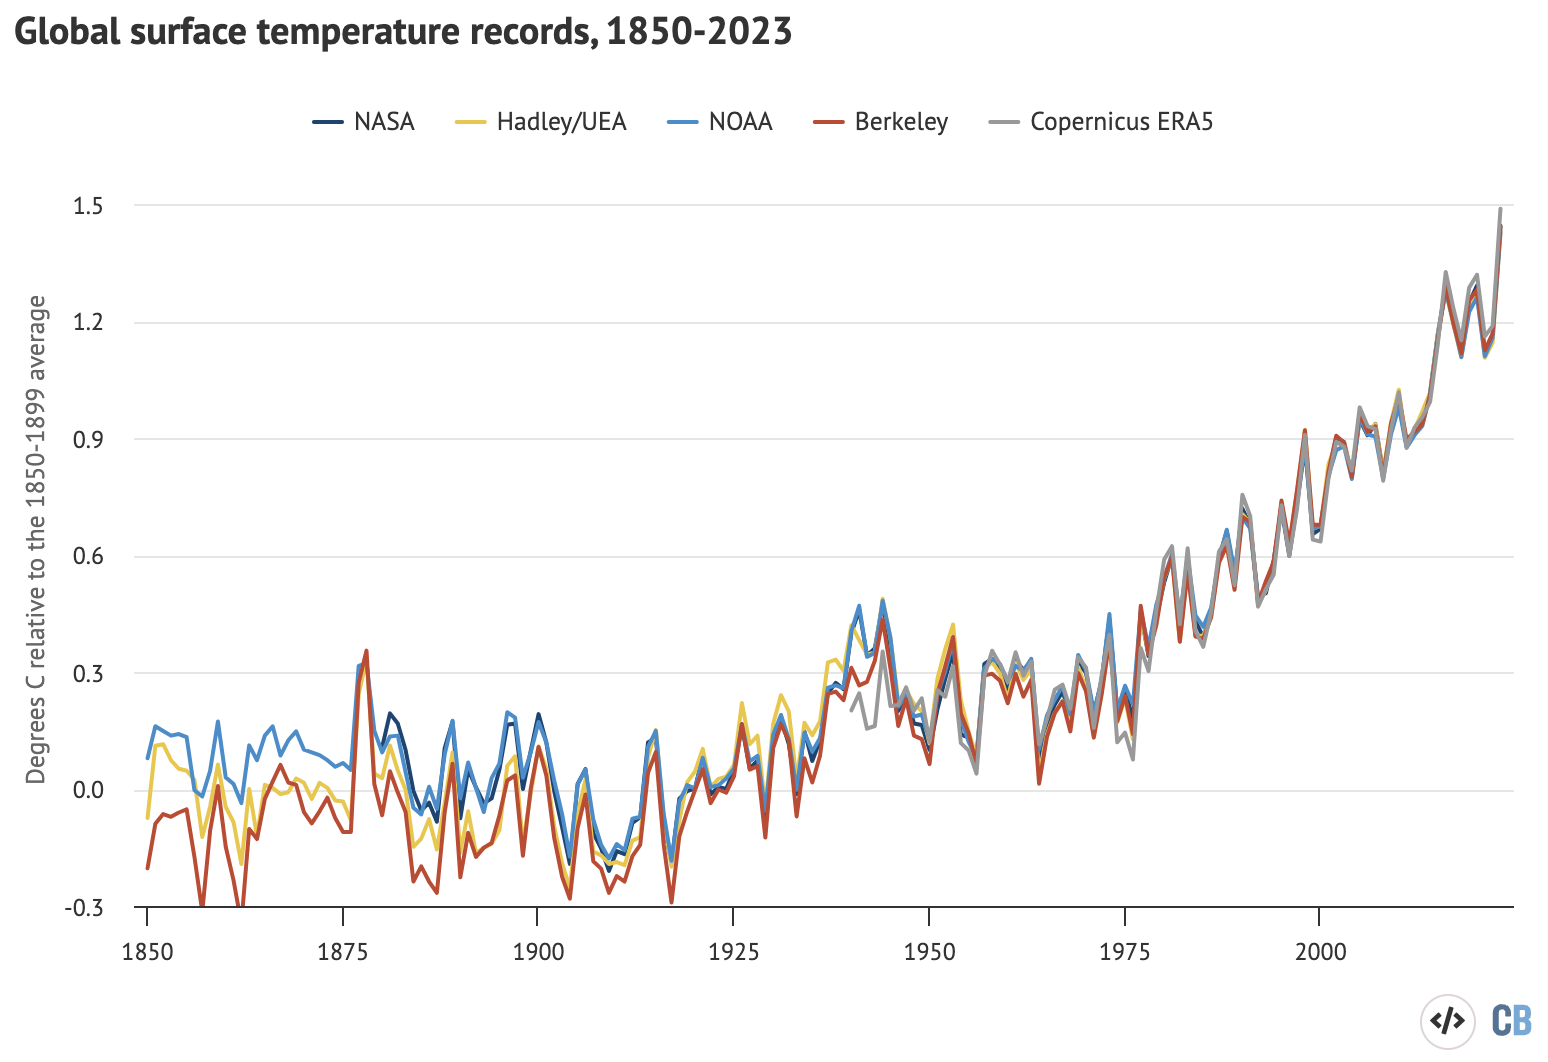 Annual global average surface temperatures over 1850-2023. Data from NASA GISTEMP, NOAA GlobalTemp, Hadley/UEA HadCRUT5, Berkeley Earth and Copernicus ERA5. Temperature records are aligned over the 1981-2010 period and use the average of NOAA, Berkeley and Hadley records to calculate warming relative to the pre-industrial baseline. Chart by Carbon Brief.